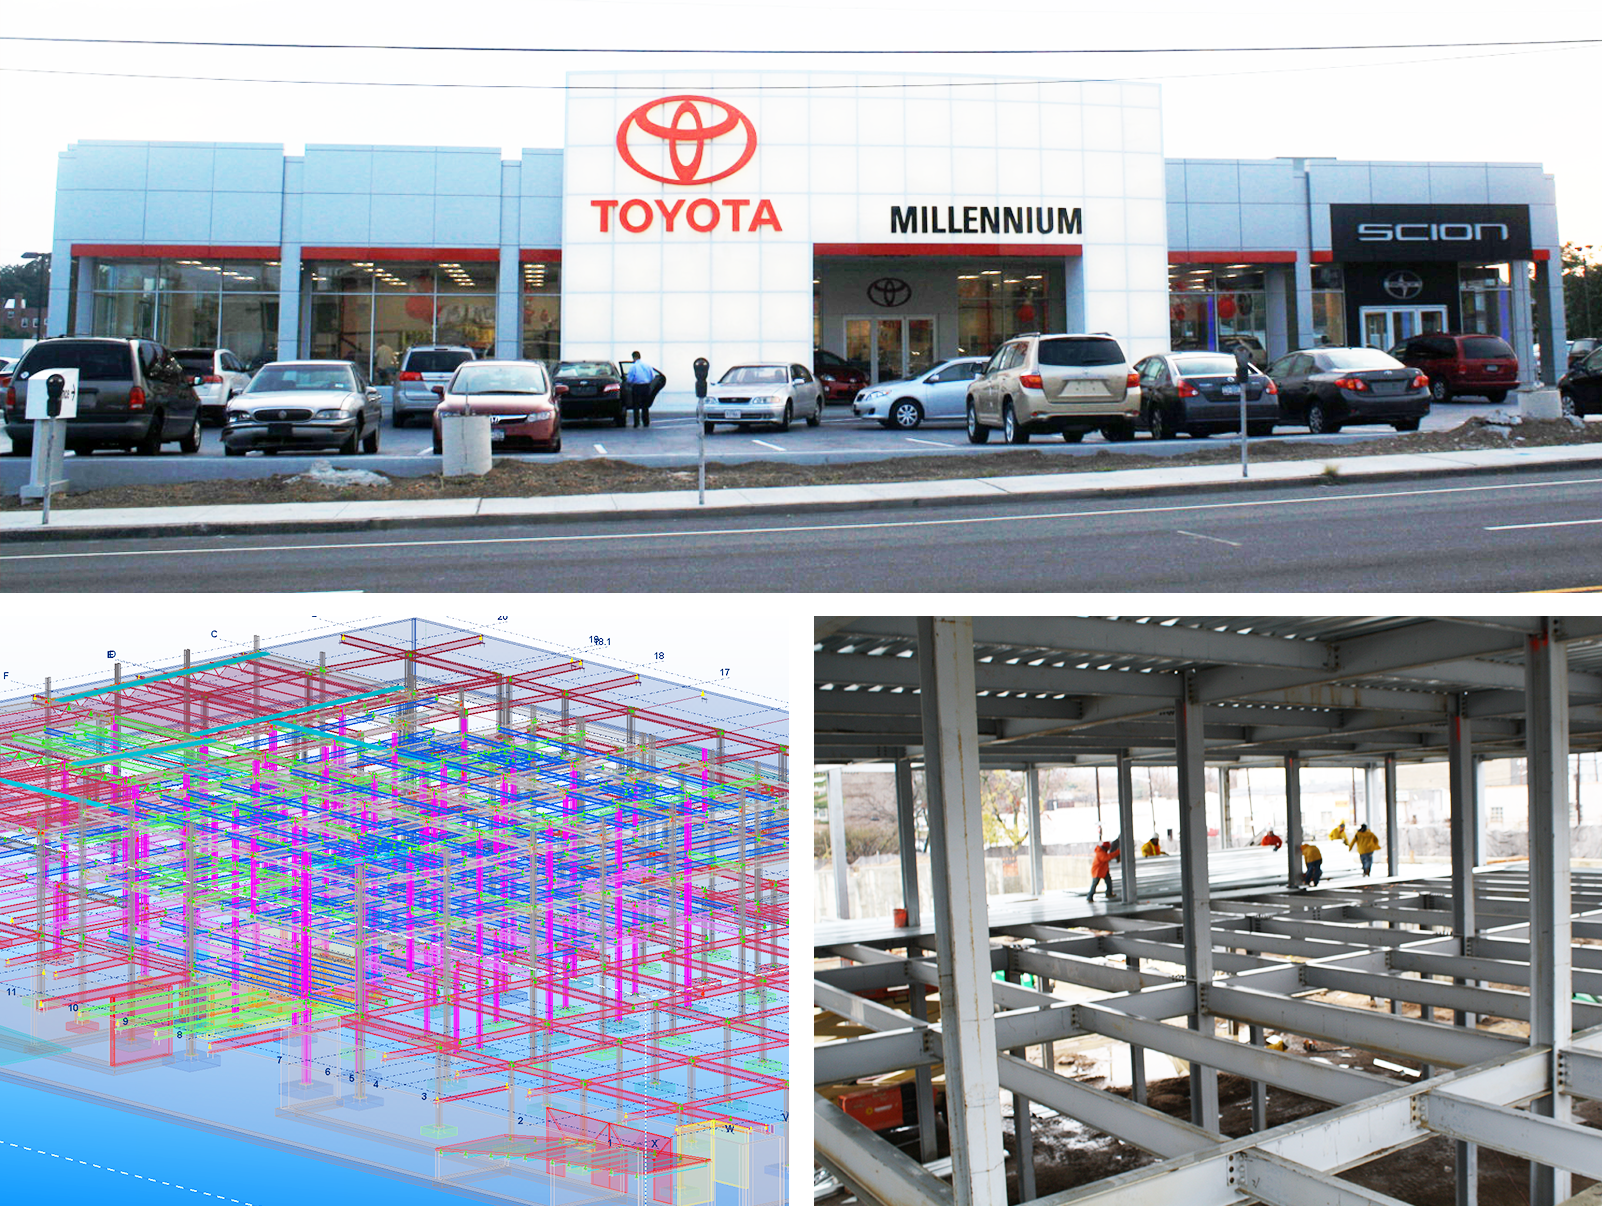   MILLENIUM TOYOTA  The three story showroom structure included an underground level (service area) footprint of over 100,000 square feet with multiple access ramps and car wash area. &nbsp;The shop drawing preparation included sequencing and phasing